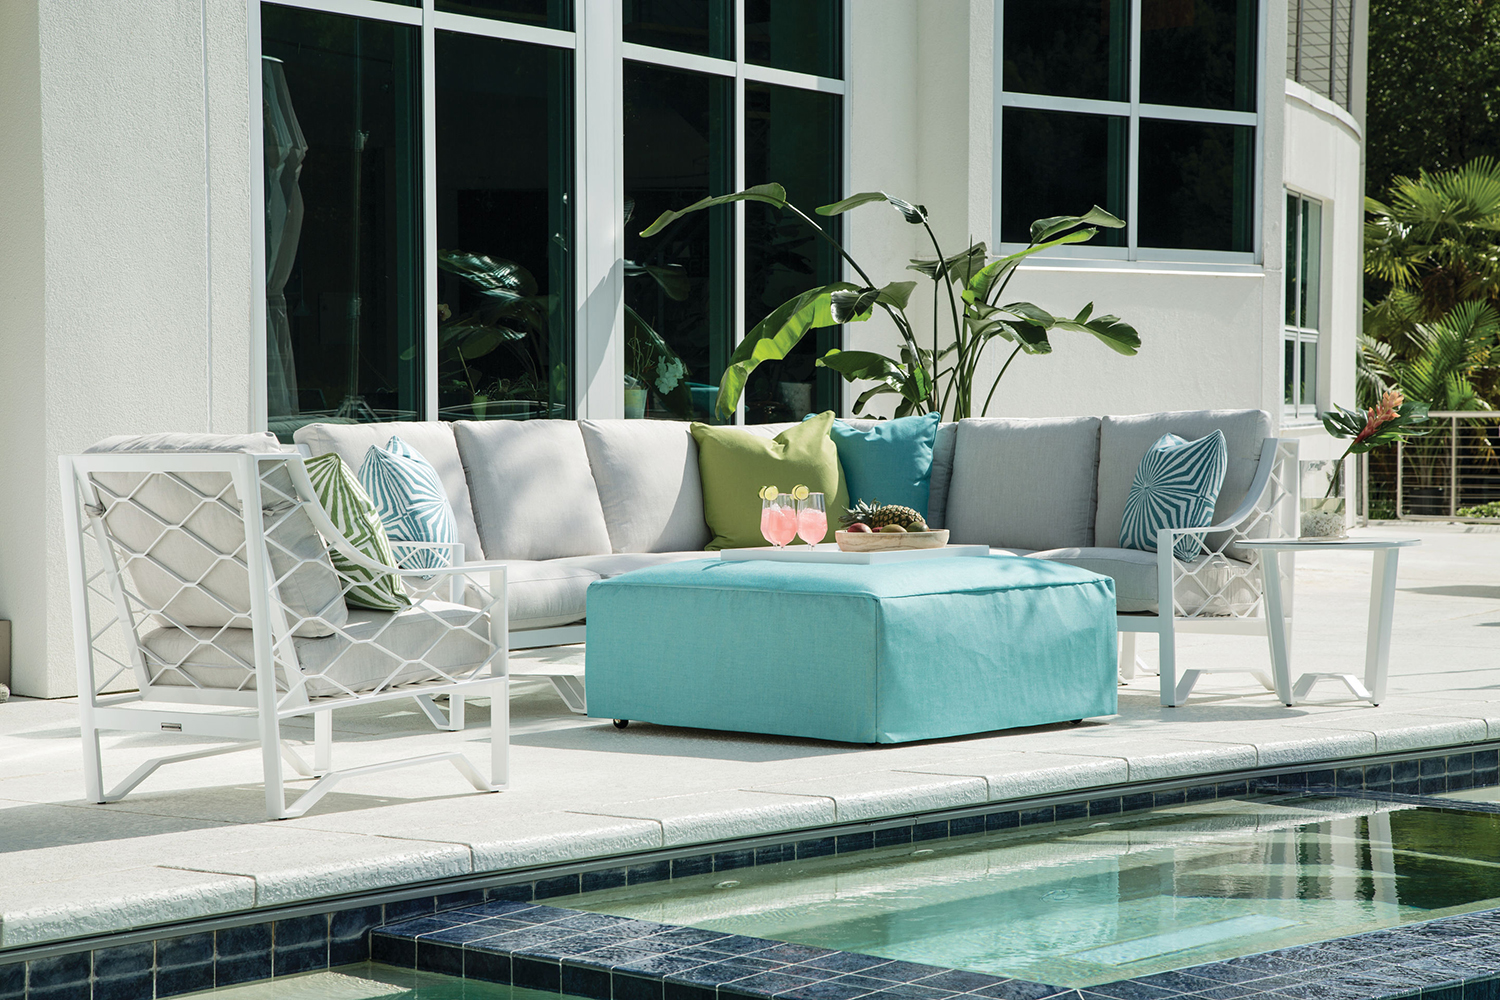 a couch sitting next to a swimming pool